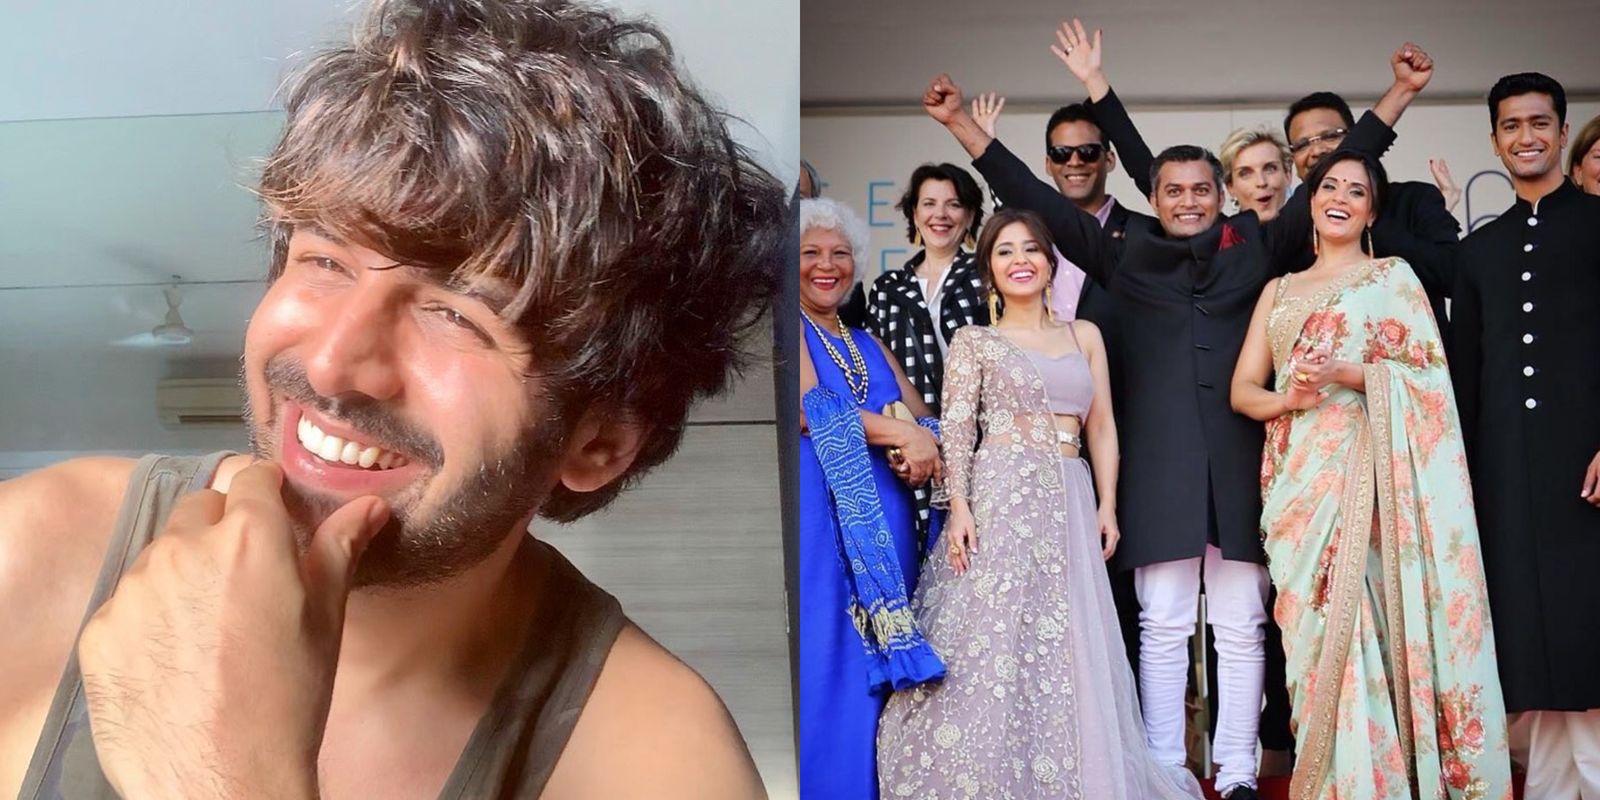 Kartik Aaryan Wins The Internet With His Bright Smile; Richa Chadha Shares Throwback Pic From Masaan Premiere